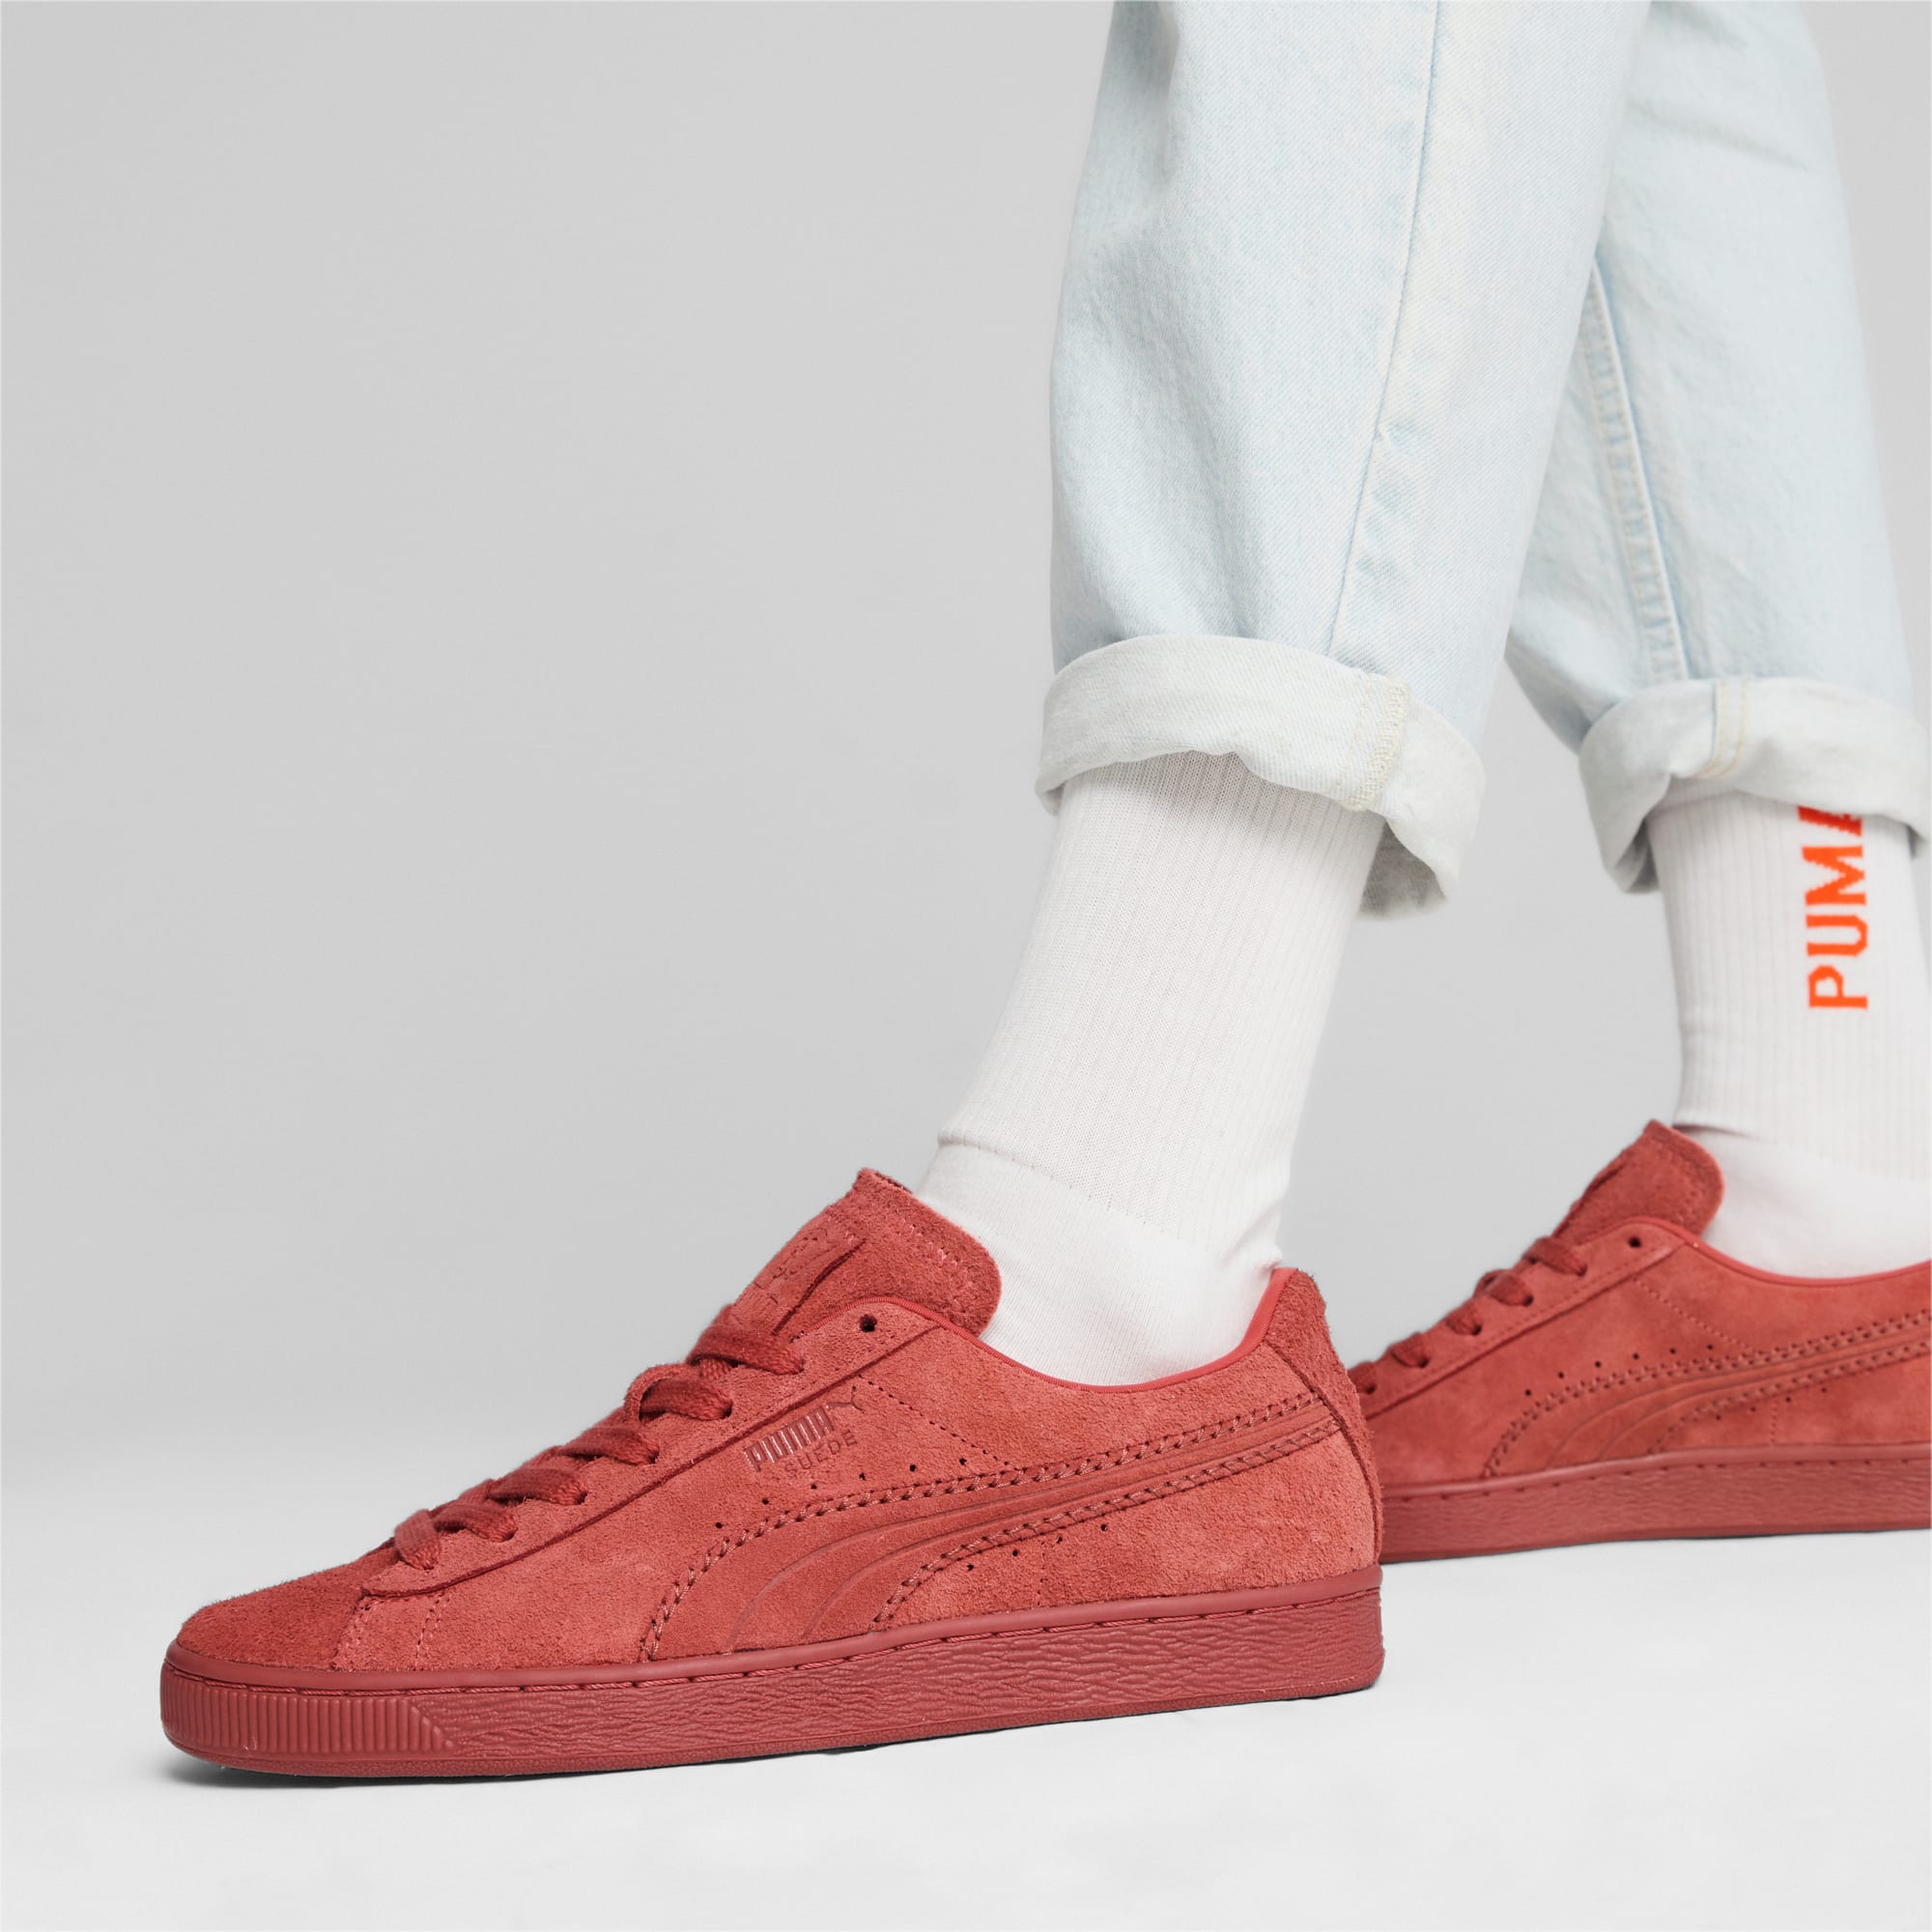 Women's PUMA Suede Reclaim Suede Sneakers, Astro Red/Astro Red, Size 35,5, Shoes